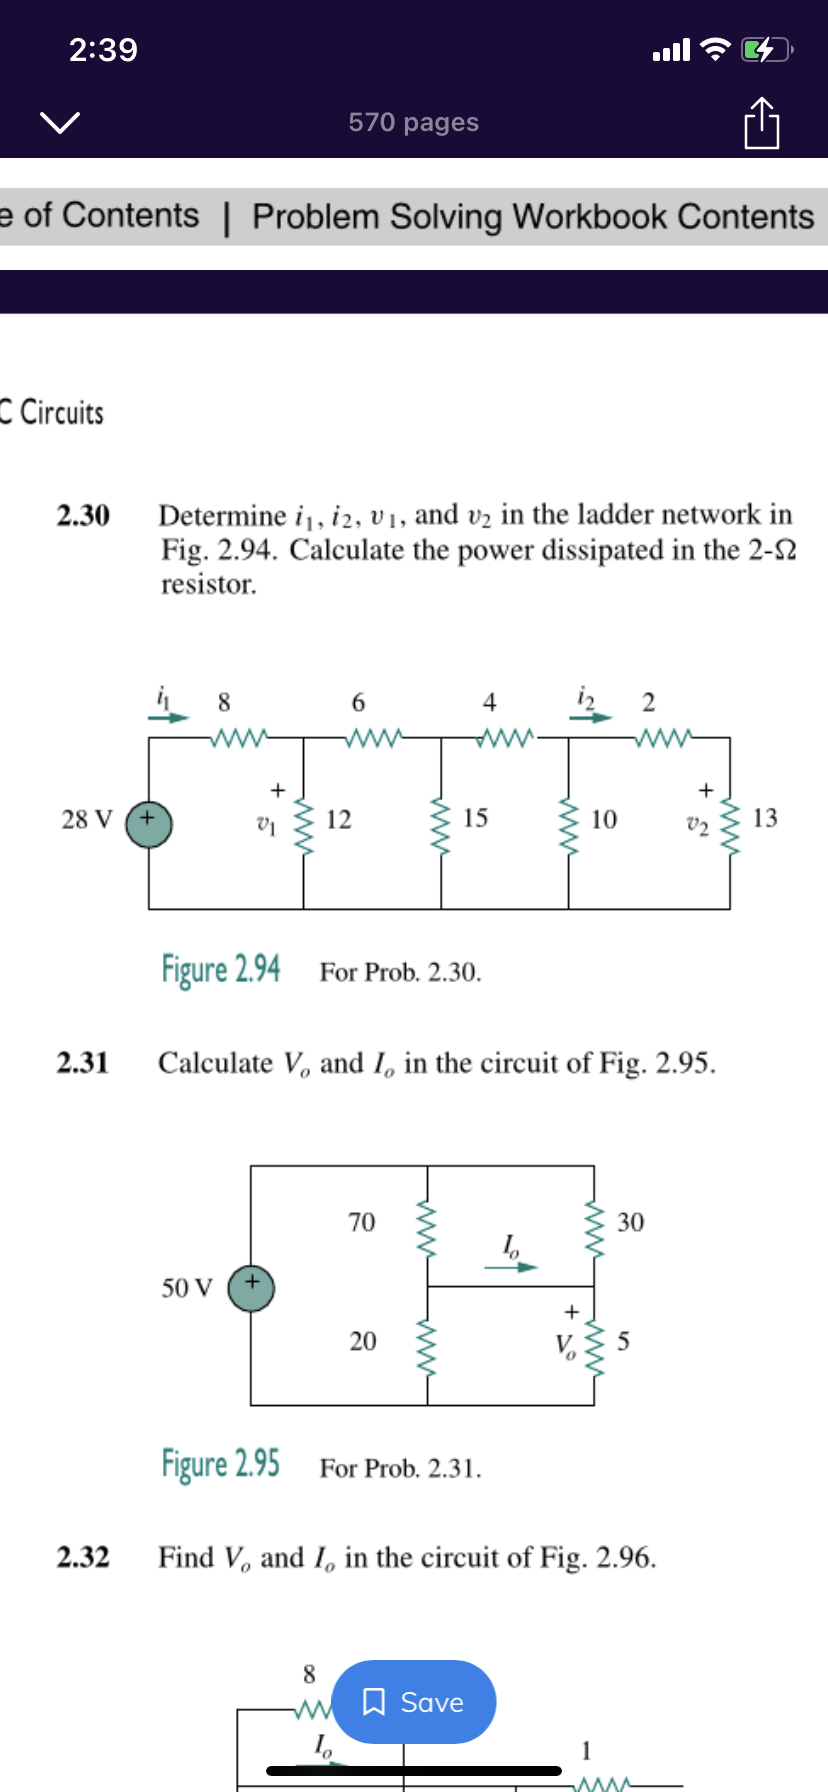 2:39
570 pages
e of Contents | Problem Solving Workbook Contents
C Circuits
Determine i, i2, v1, and vz in the ladder network in
Fig. 2.94. Calculate the power dissipated in the 2-S2
resistor.
2.30
8
6.
4
2
ww
+
+
28 V
12
15
10
V2
13
Figure 2.94
For Prob. 2.30.
2.31
Calculate V, and I, in the circuit of Fig. 2.95.
70
30
50 V
+
20
Figure 2.95
For Prob. 2.31.
2.32
Find V, and I, in the circuit of Fig. 2.96.
8.
W W Save
ww
ww
ww-
